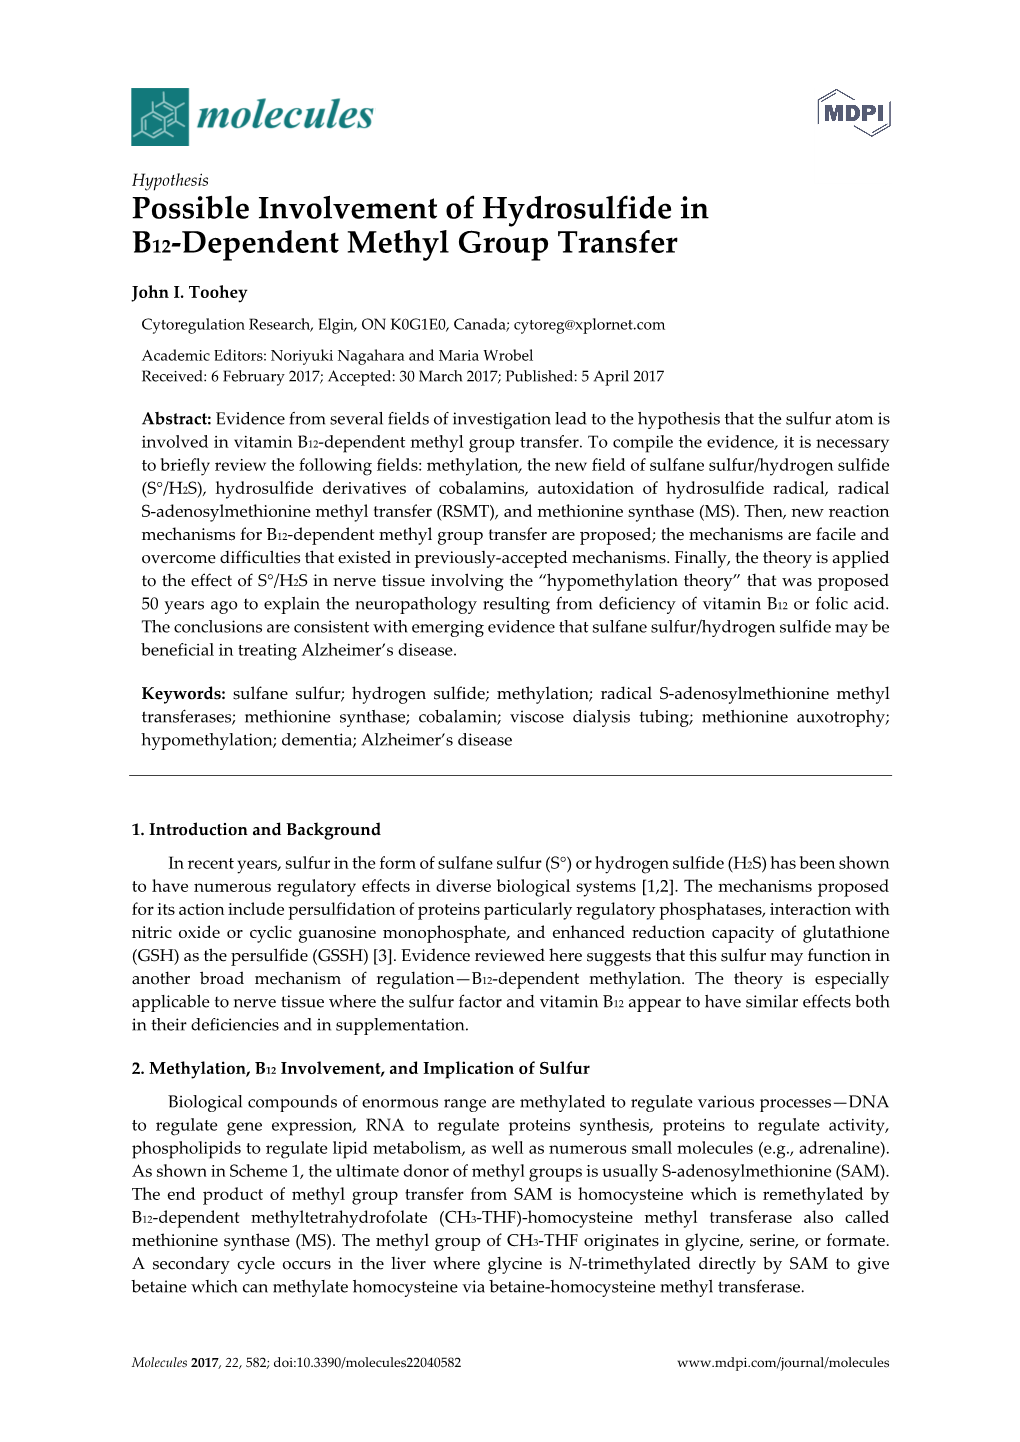 Possible Involvement of Hydrosulfide in B12-Dependent Methyl Group Transfer